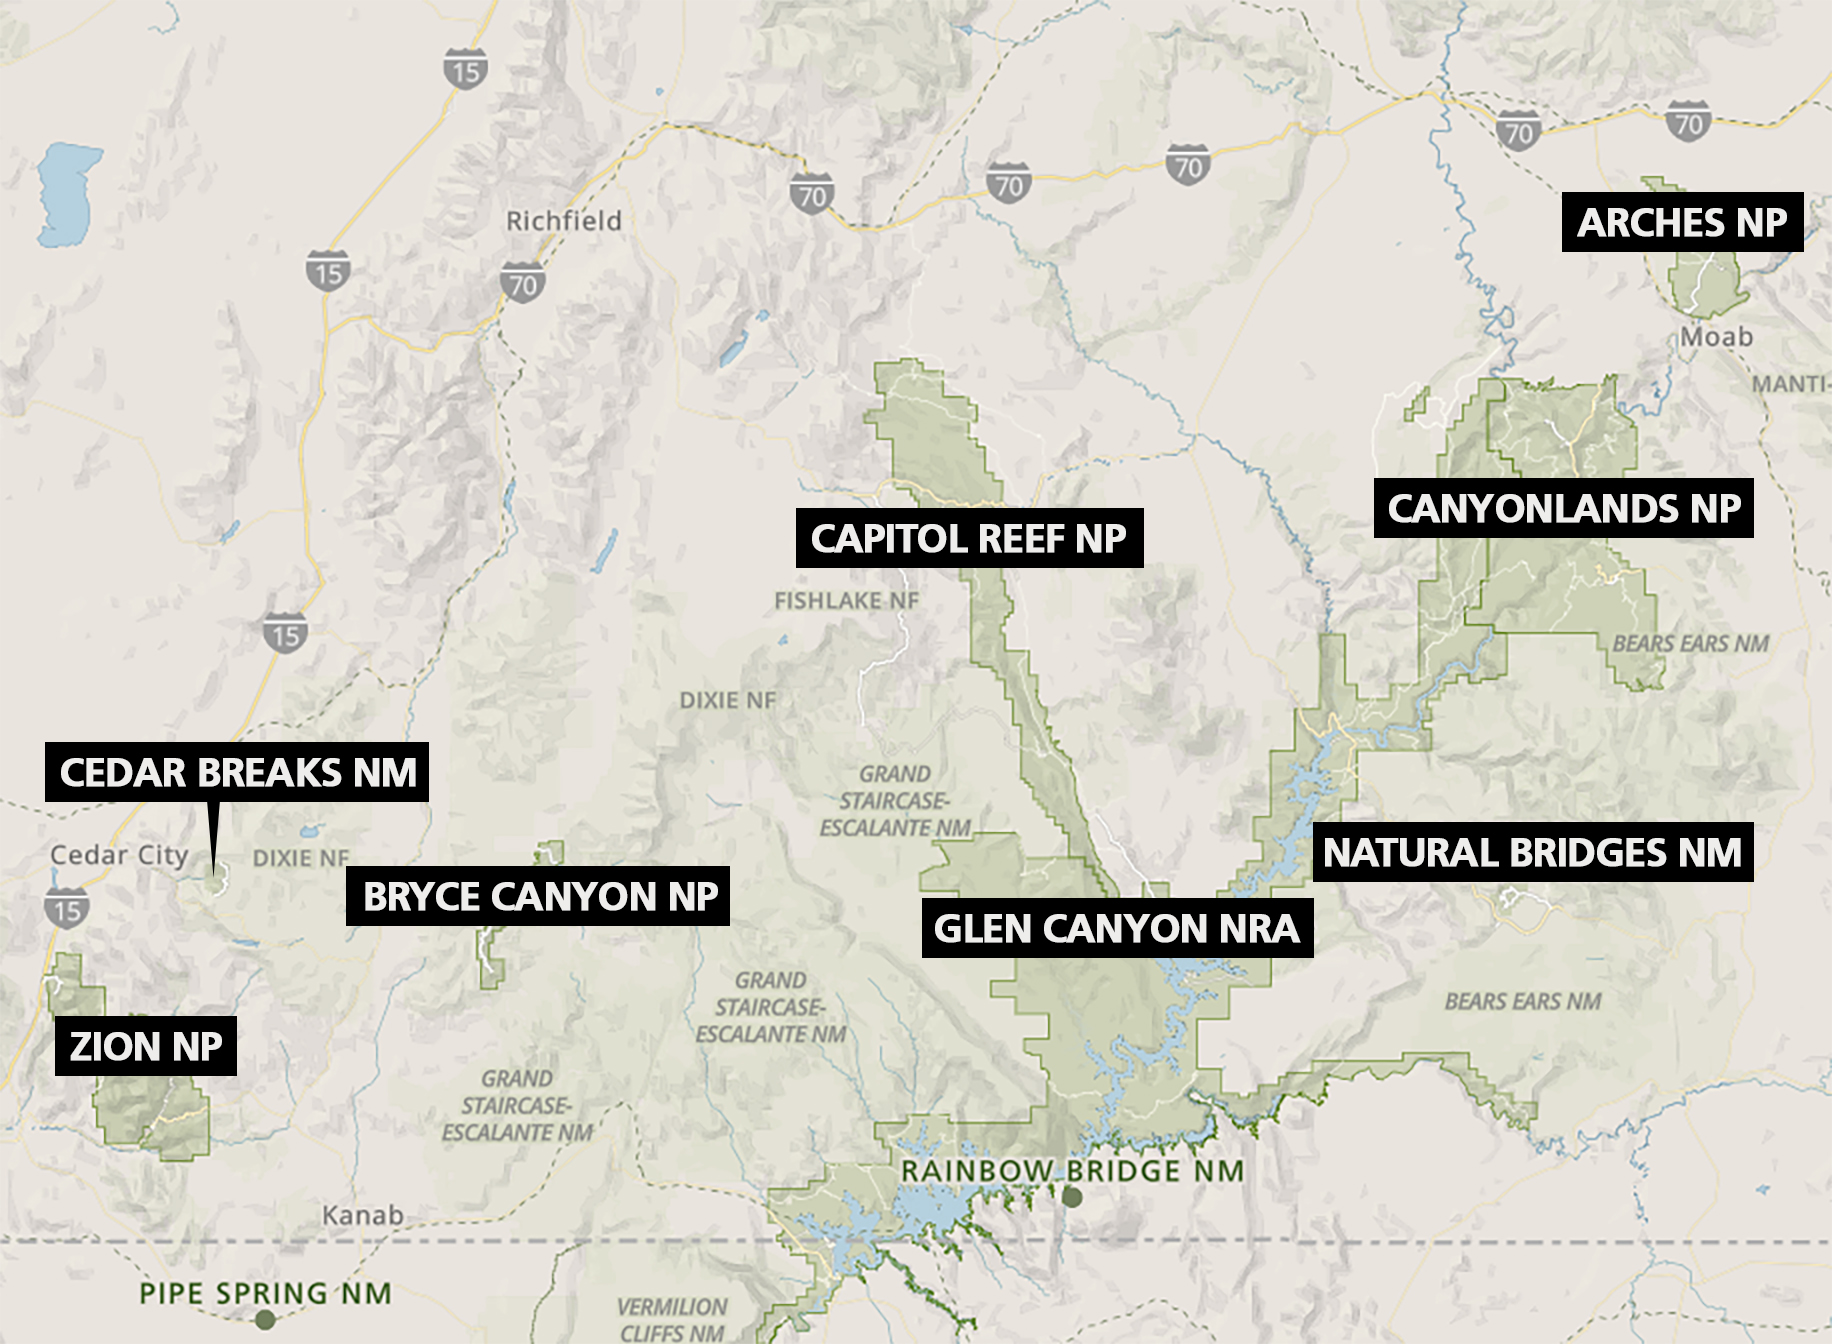 Map of national park sites in southern utah. West to east: Zion National Park, Cedar Breaks National Monument, Bryce Canyon National Park, Capitol Reef National Park, Glen Canyon National Recreation Area, Canyonlands National Park, Arches National Park